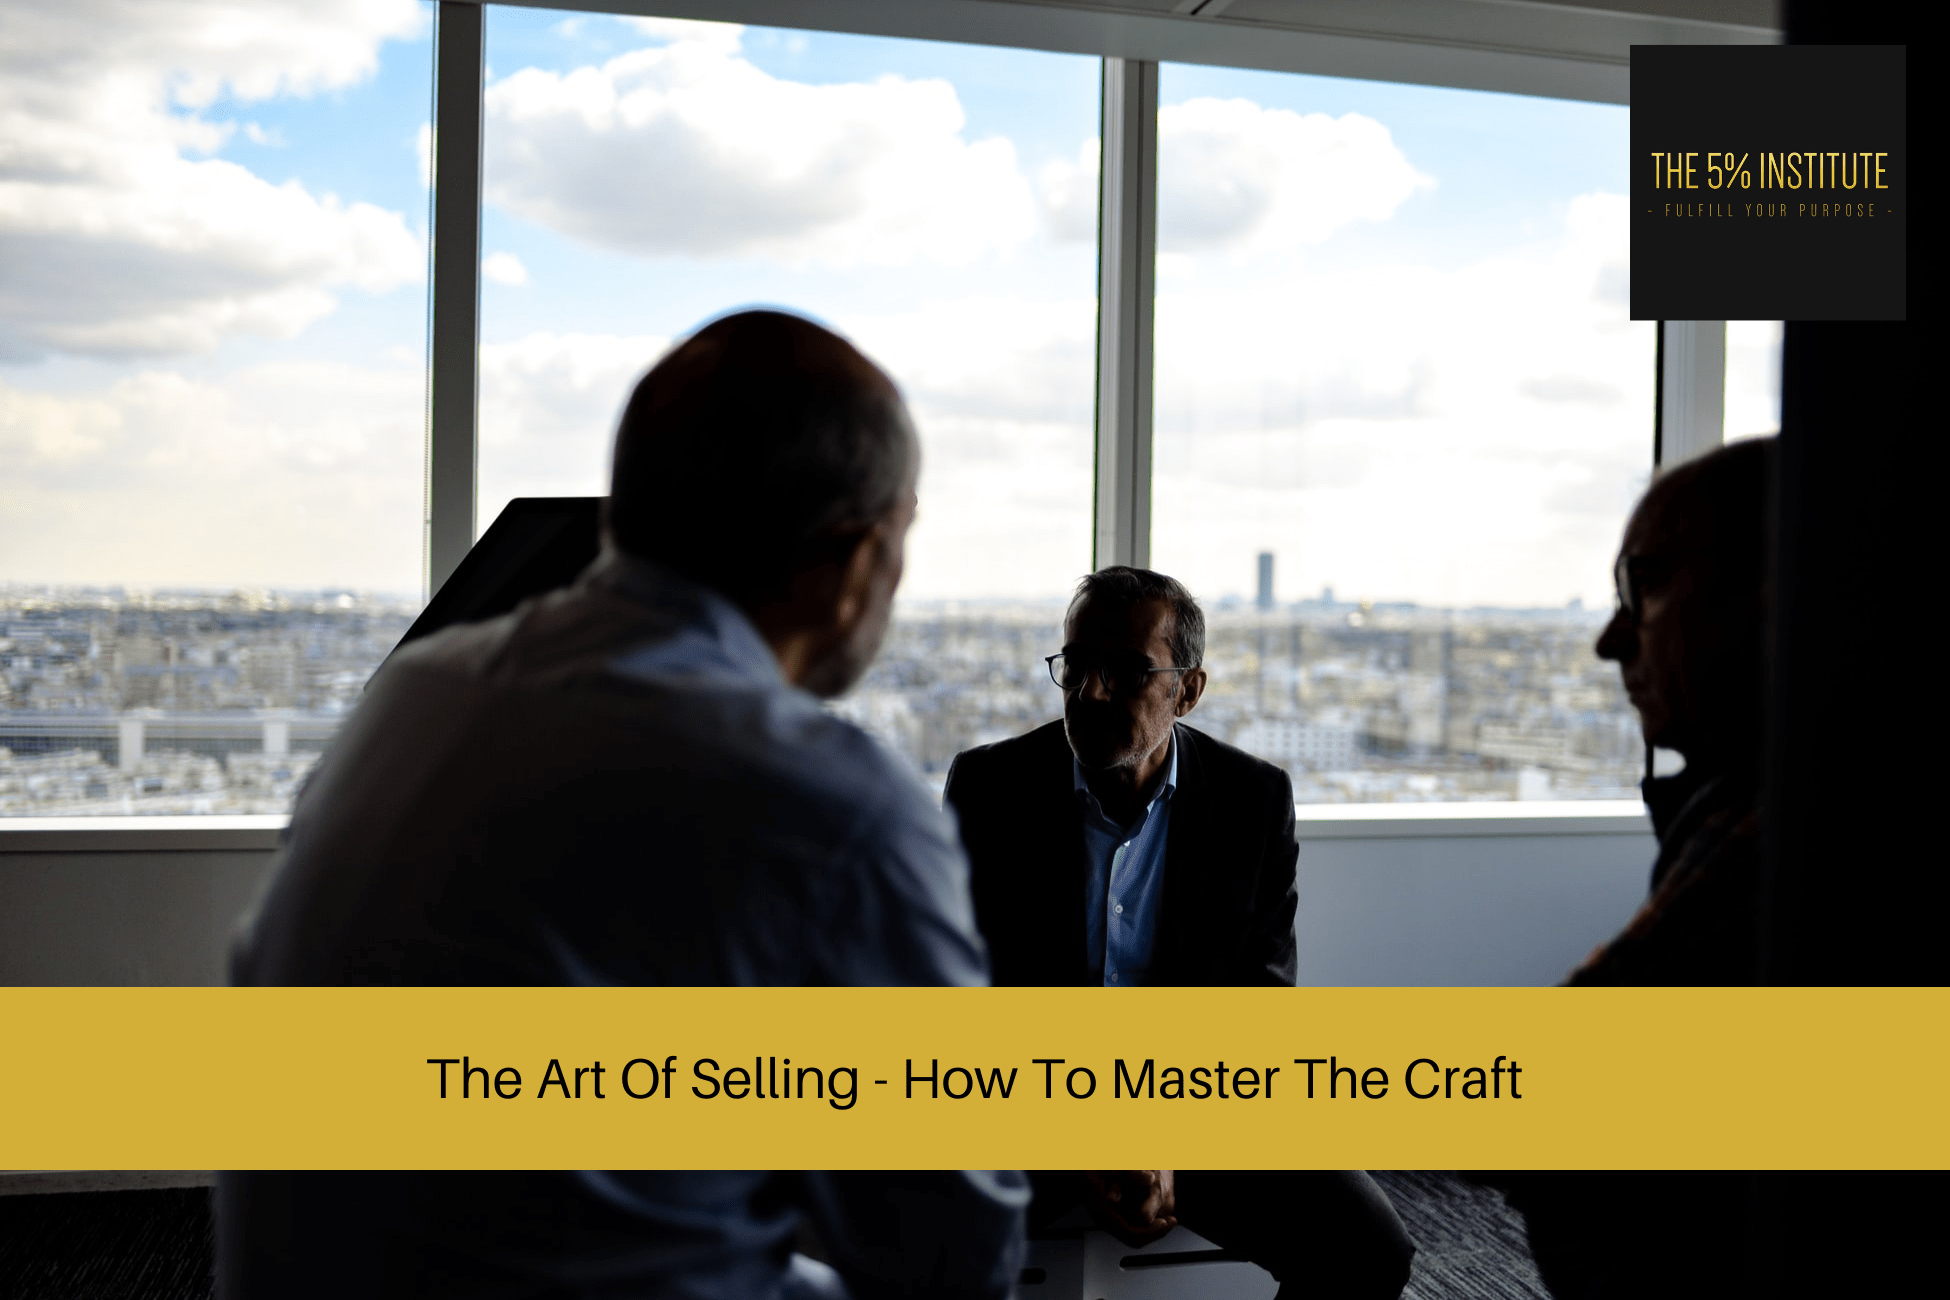 The Art Of Selling - How To Master The Craft